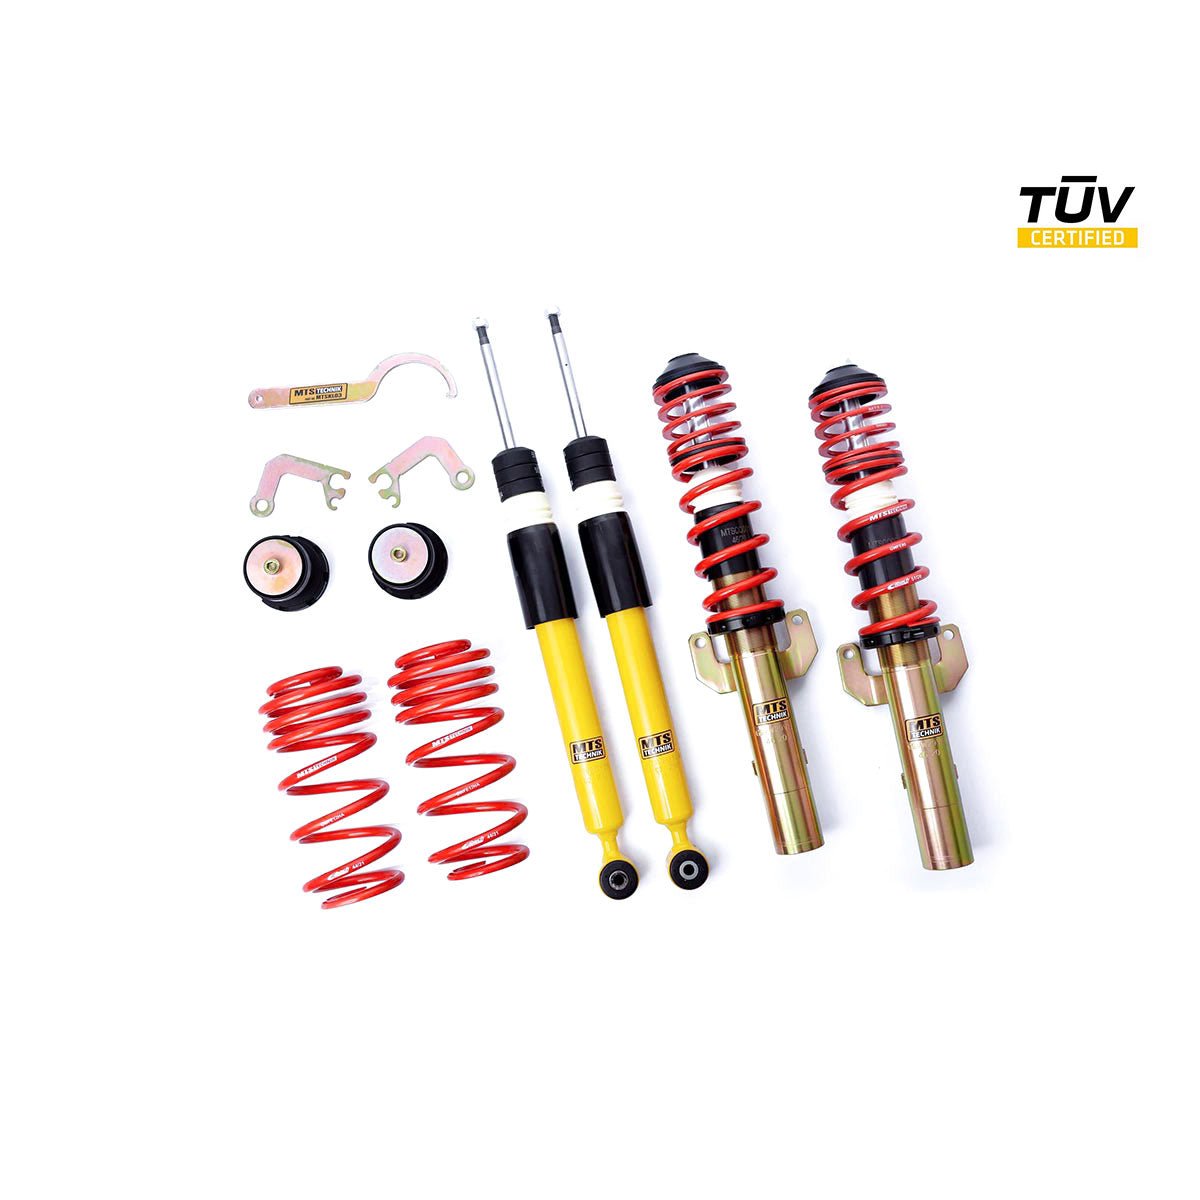 MTS TECHNIK coilover kit COMFORT Audi A1 8X (with TÜV) - PARTS33 GmbH